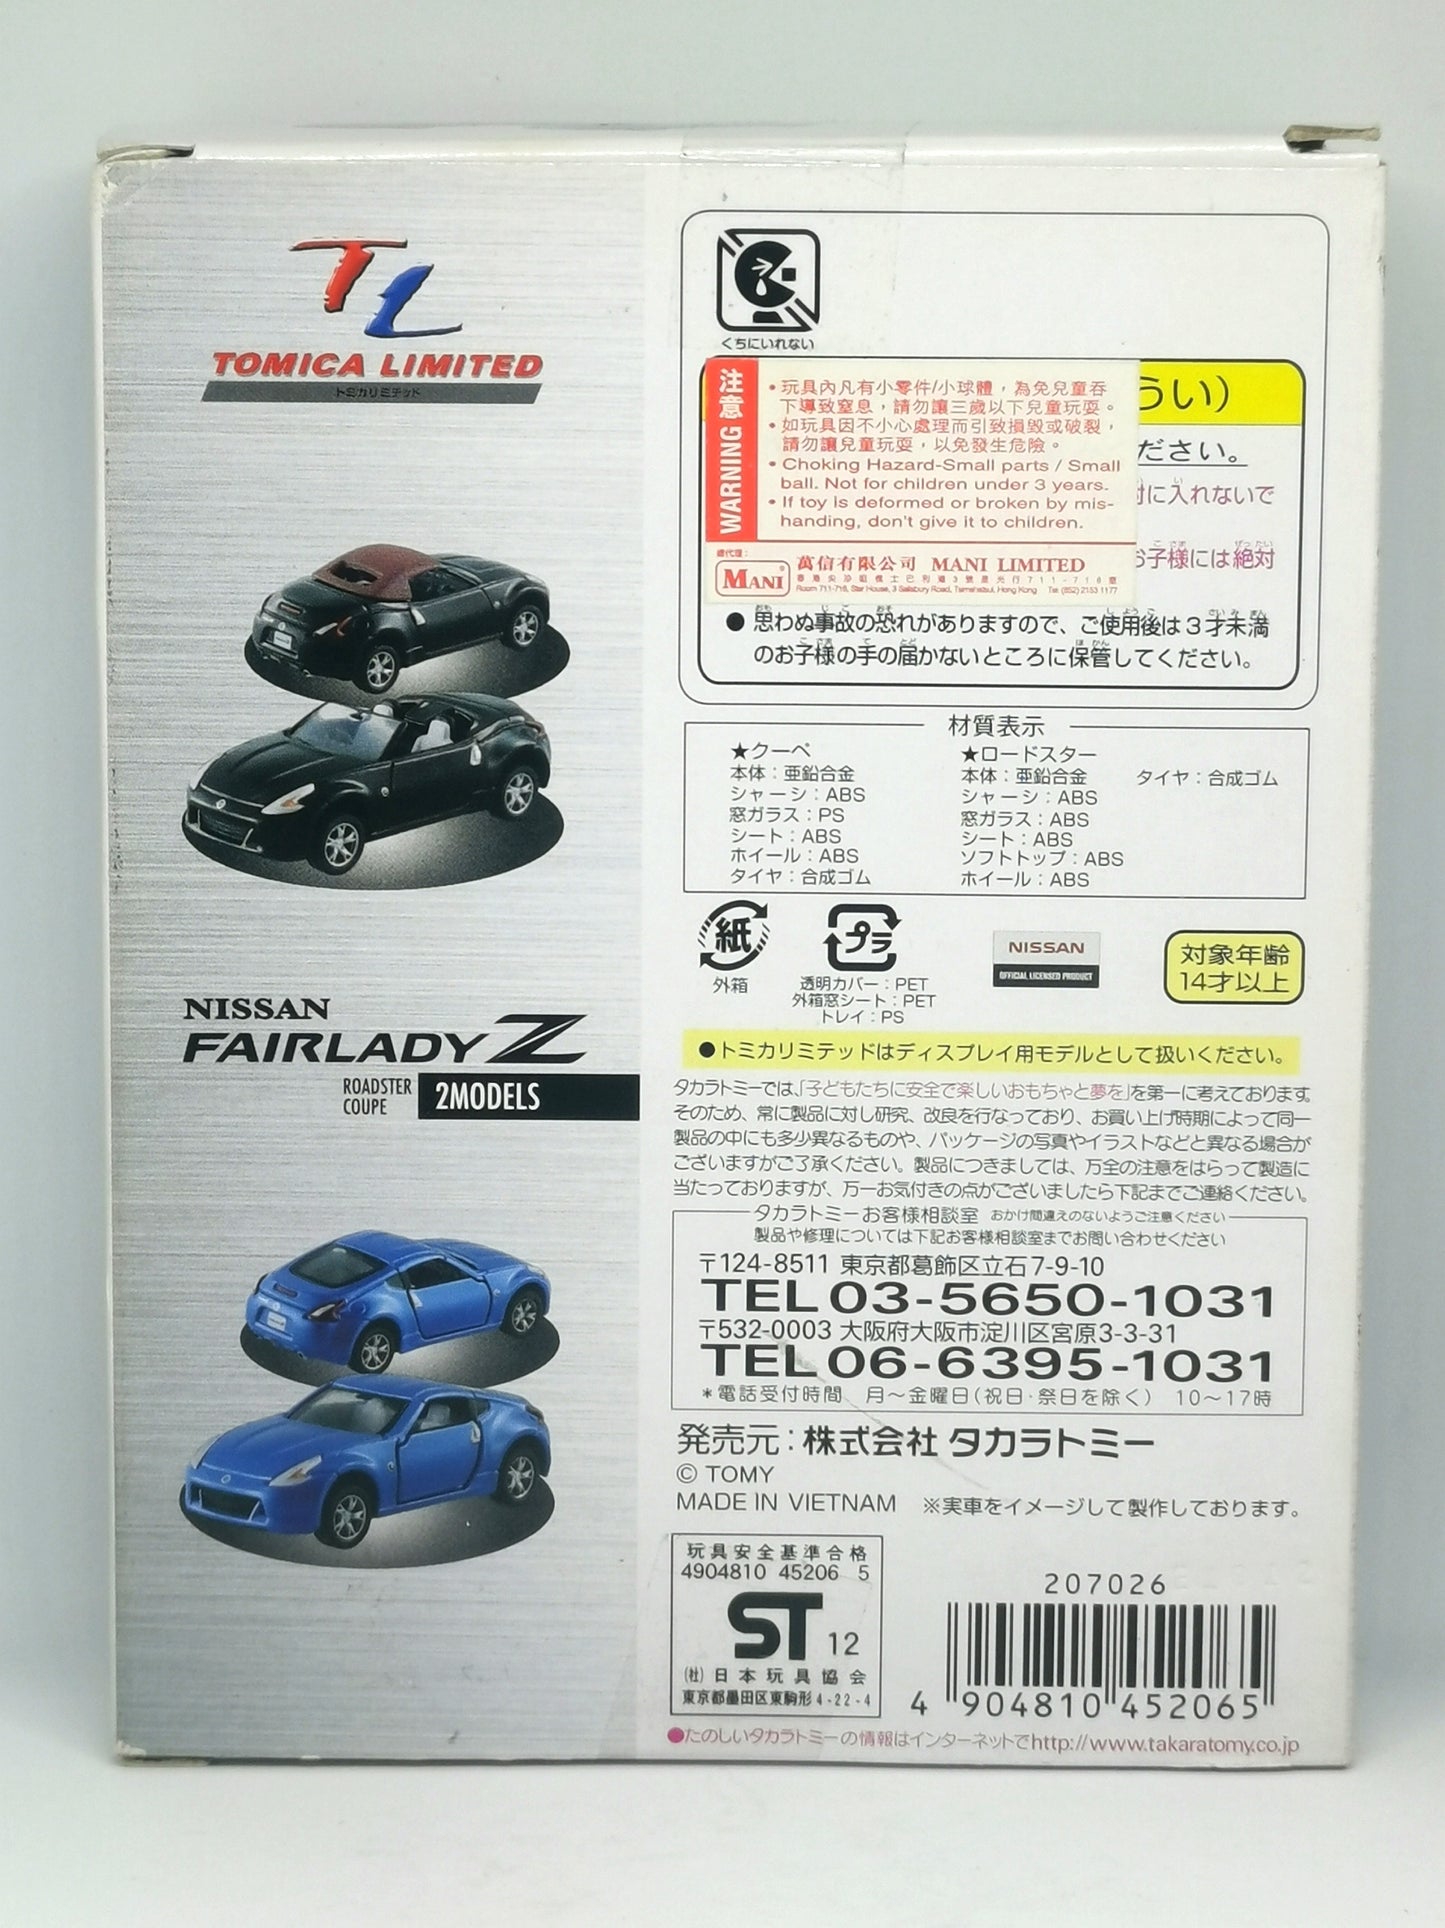 Tomica Limited Nissan Fairlady Z Roadster Coupe 2 Models